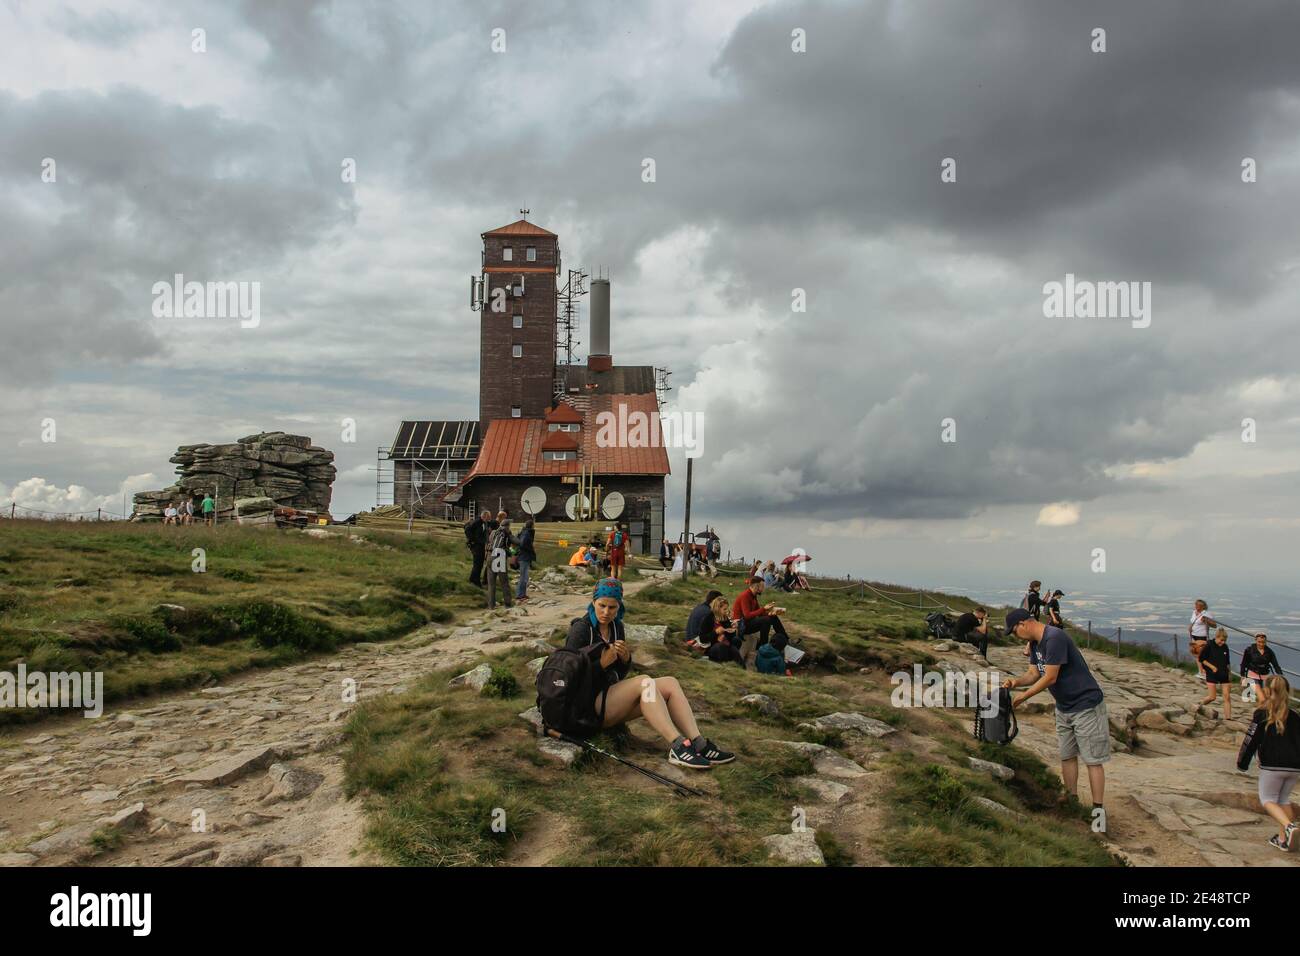 Snezne jamy, Czech Republic-July 25,2020. A remoted building on Polish-Czech border in Krkonose,Giant mountains.People having rest after hiking and en Stock Photo